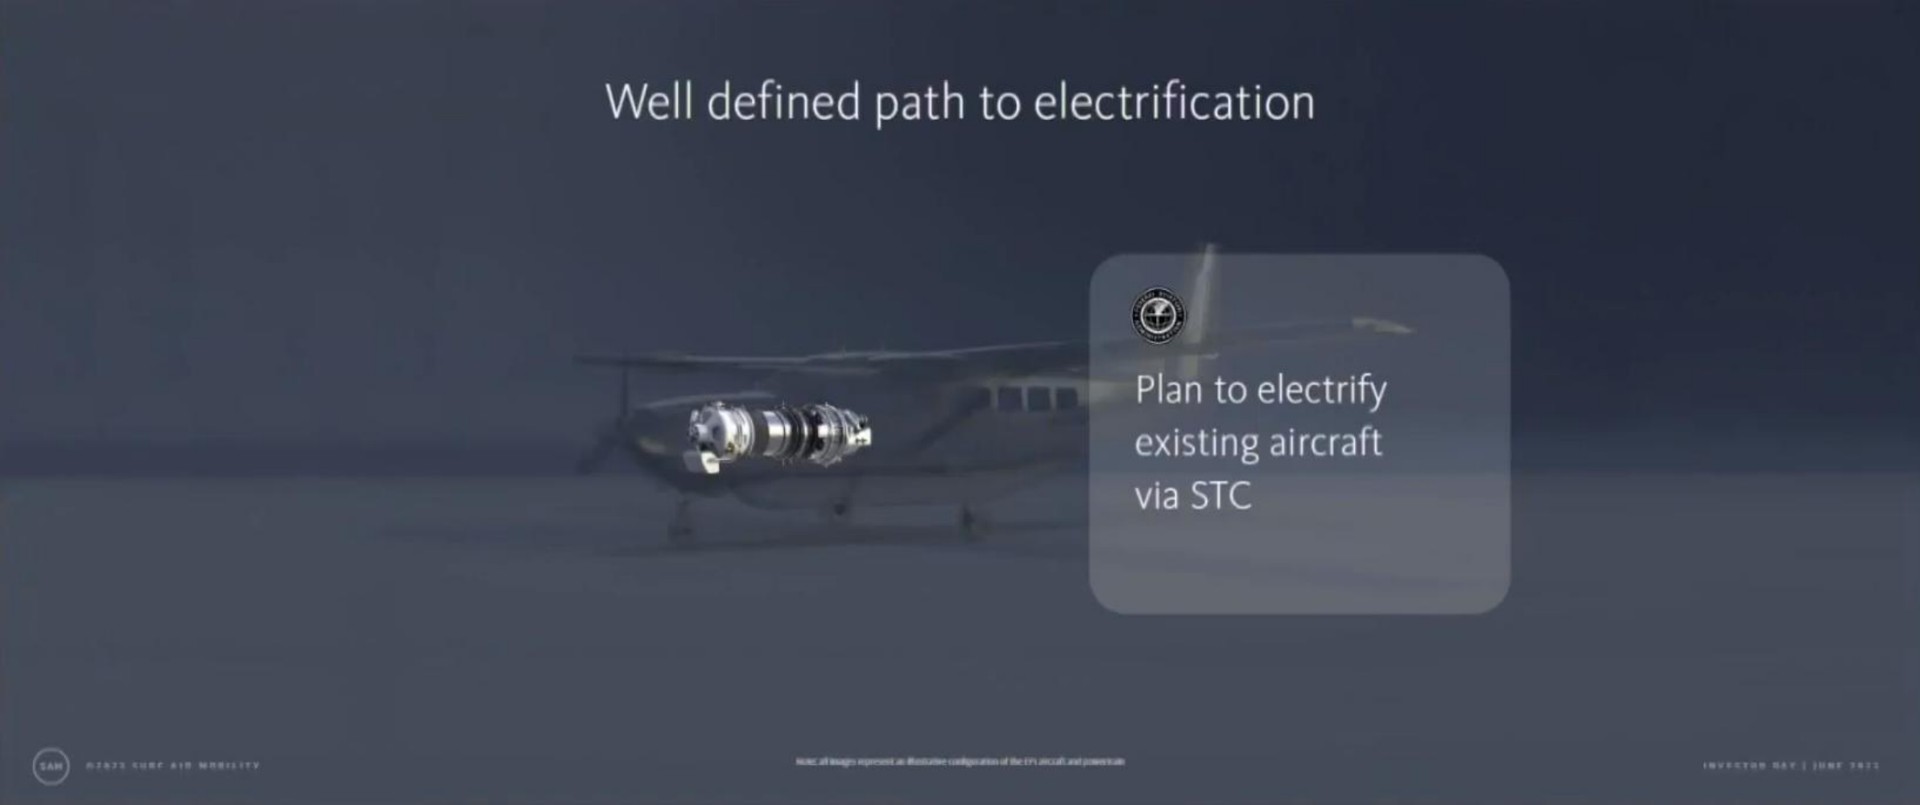 well defined path to electrification | Surf Air